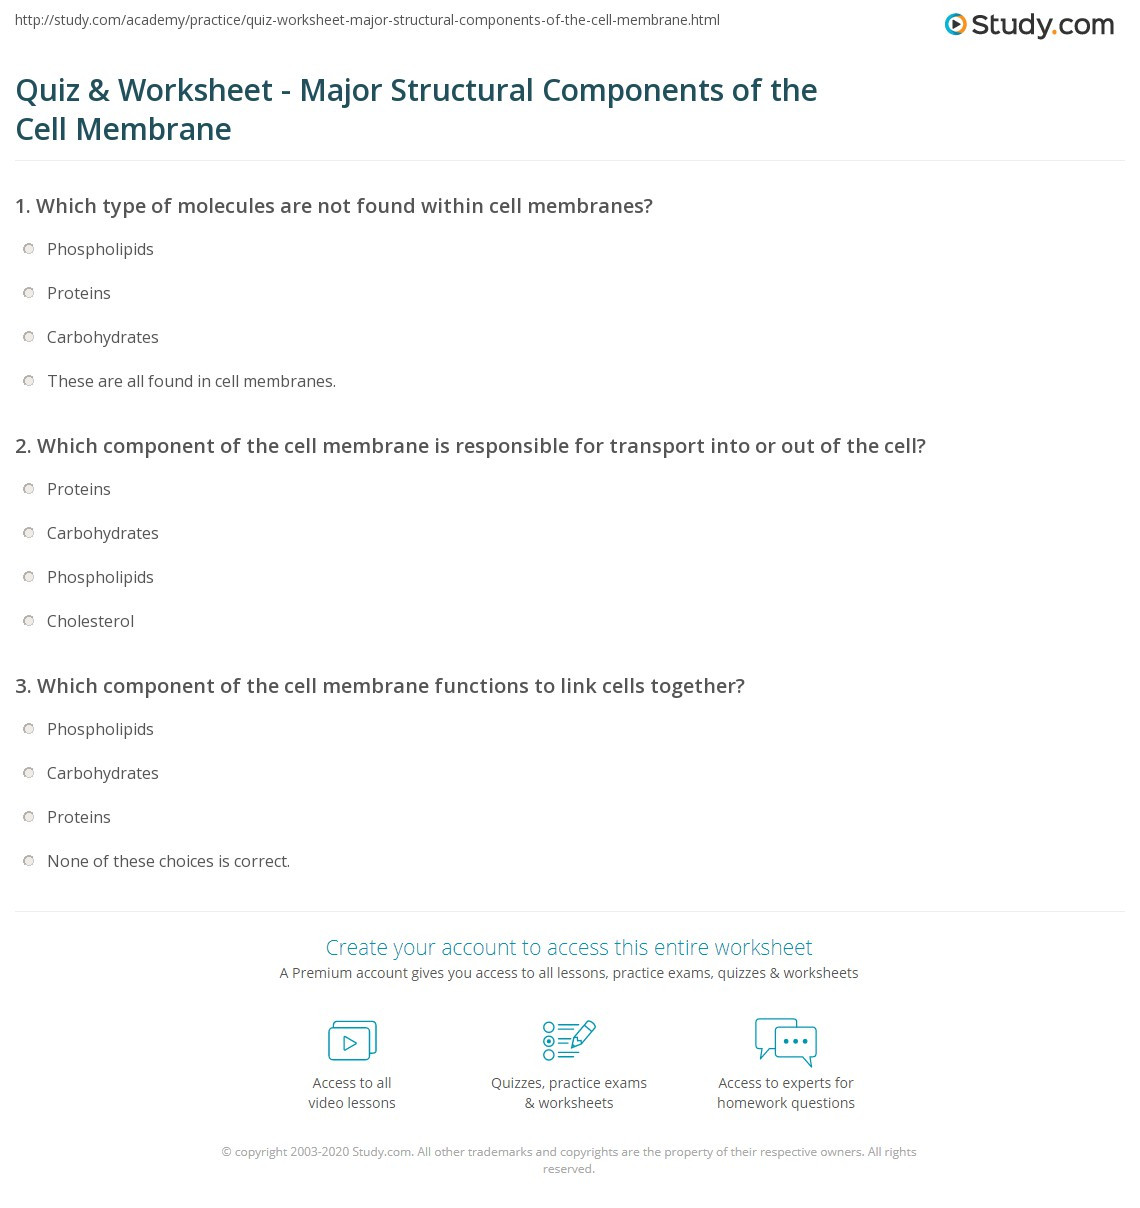 Membrane Structure and Function Worksheet Quiz &amp; Worksheet Major Structural Ponents Of the Cell